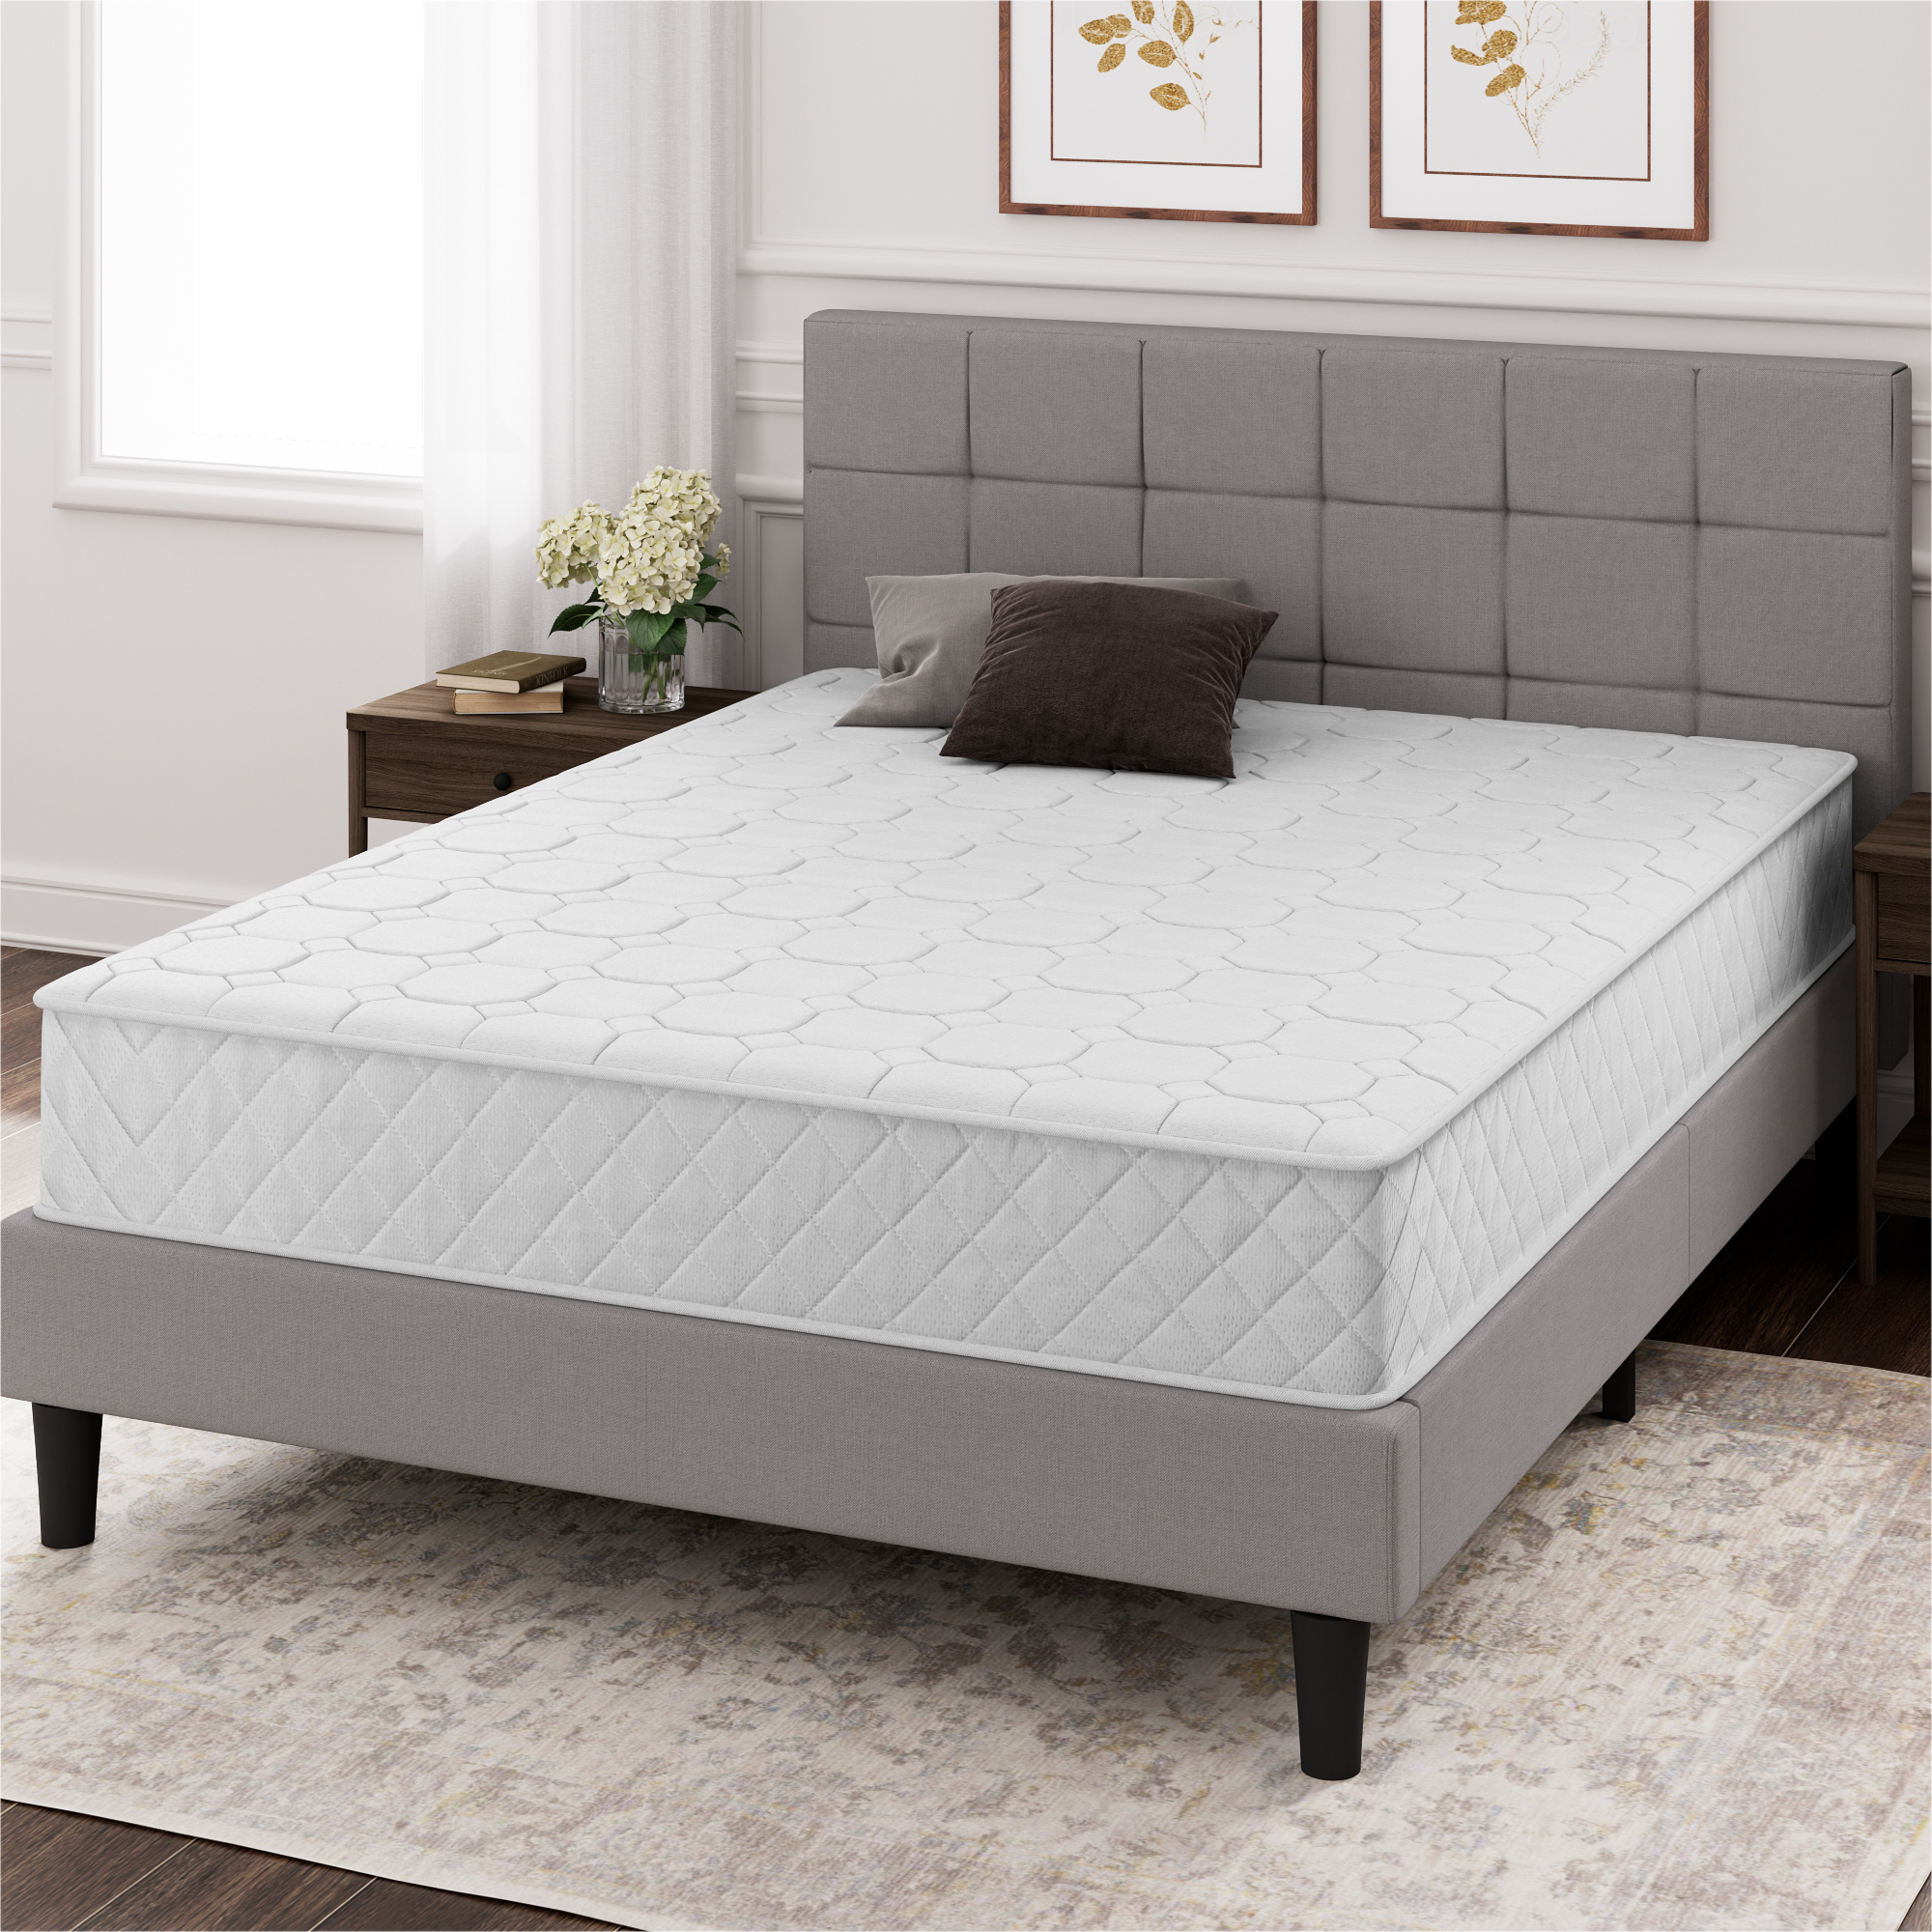 Zinus 8" Quilted Hybrid Mattress of Comfort Foam and Pocket Spring, Adult, Queen - image 1 of 9